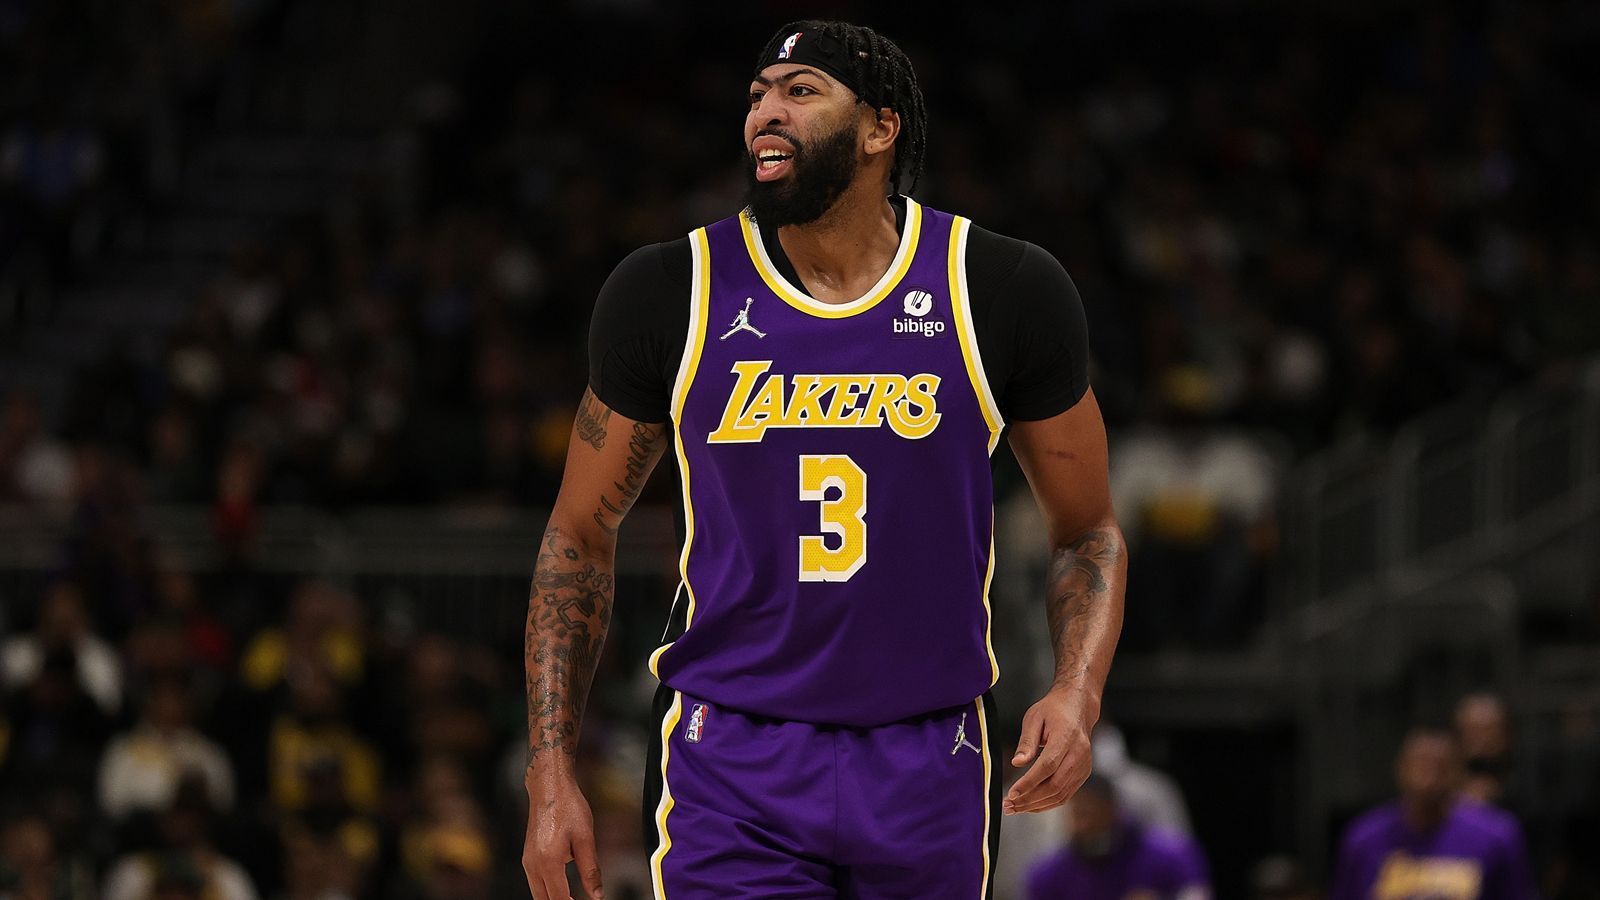 
                <strong>12. Platz: Anthony Davis (Los Angeles Lakers)</strong><br>
                &#x2022; 27 Spiele -<br>&#x2022; 23,3 Punkte pro Spiel -<br>&#x2022; 9,9 Rebounds pro Spiel -<br>&#x2022; 2,9 Assists pro Spiel -<br>&#x2022; 17,9% Dreierquote -<br>
              